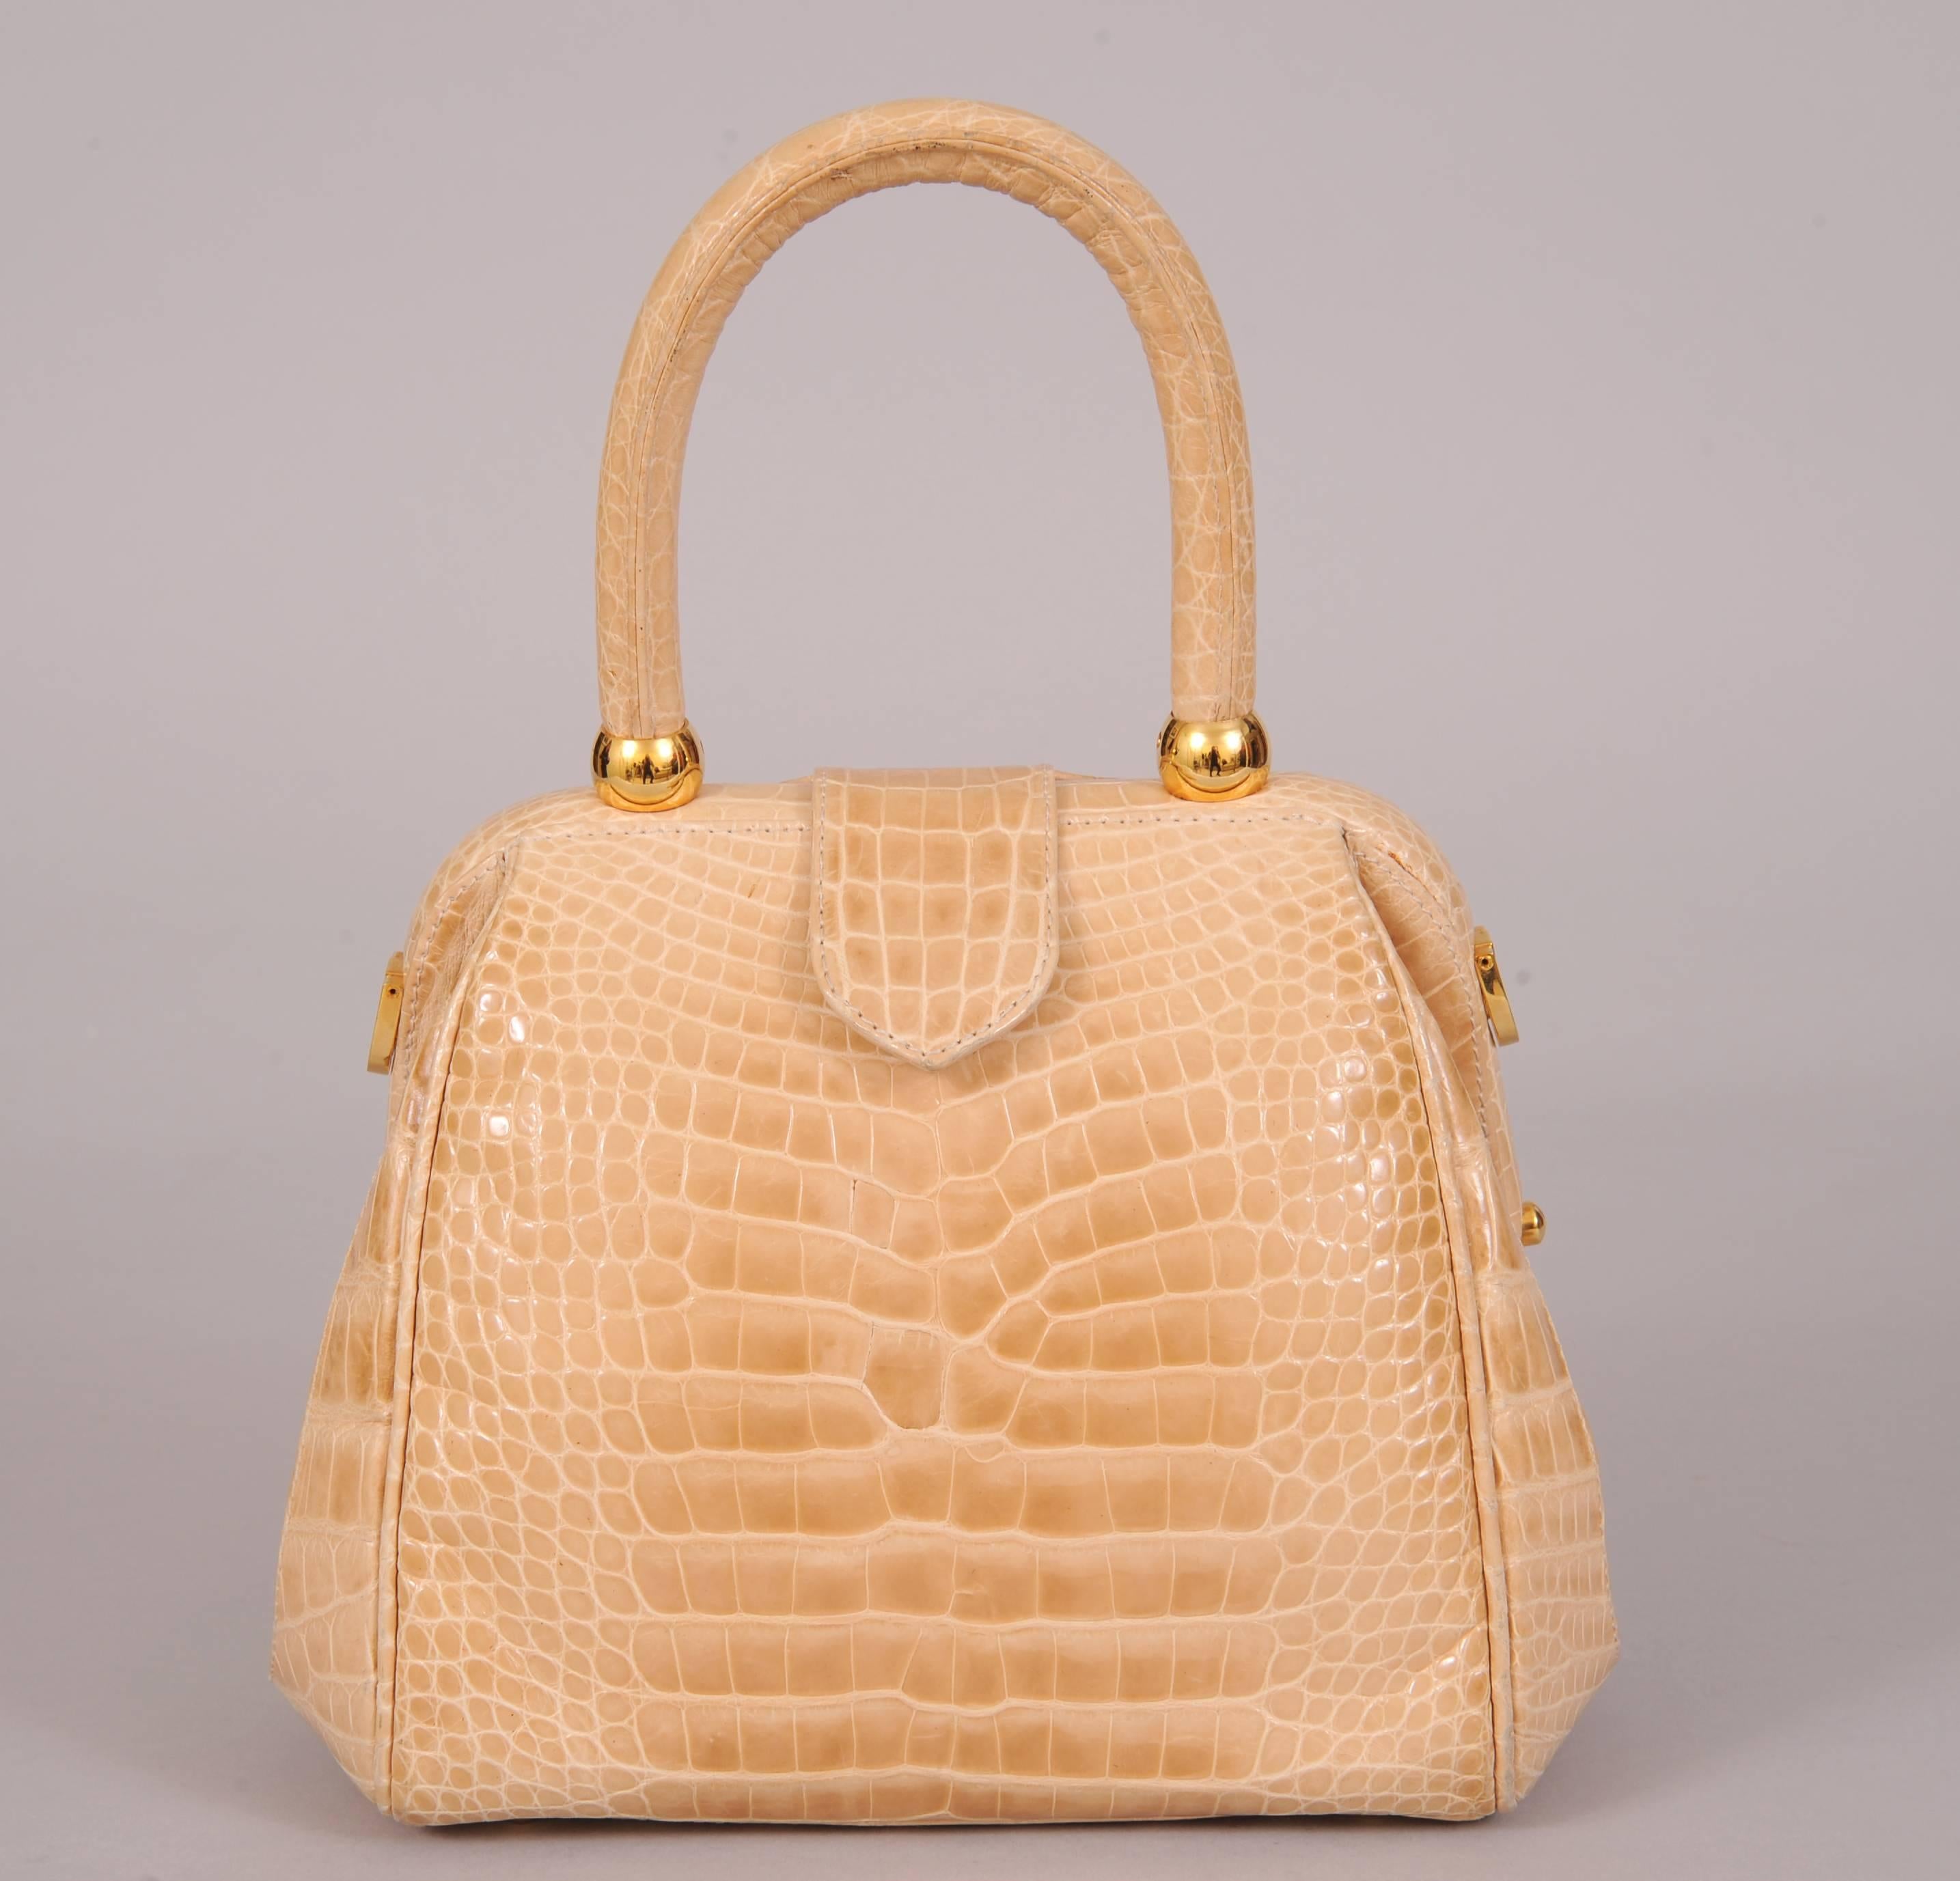 A warm cream colored alligator bag from Lana Marks has a generous pocket on the front. The snap closure tab reaches over the frame to close on the back. The bag is lined in cream leather and has one zippered pocket and one slip pocket inside. An